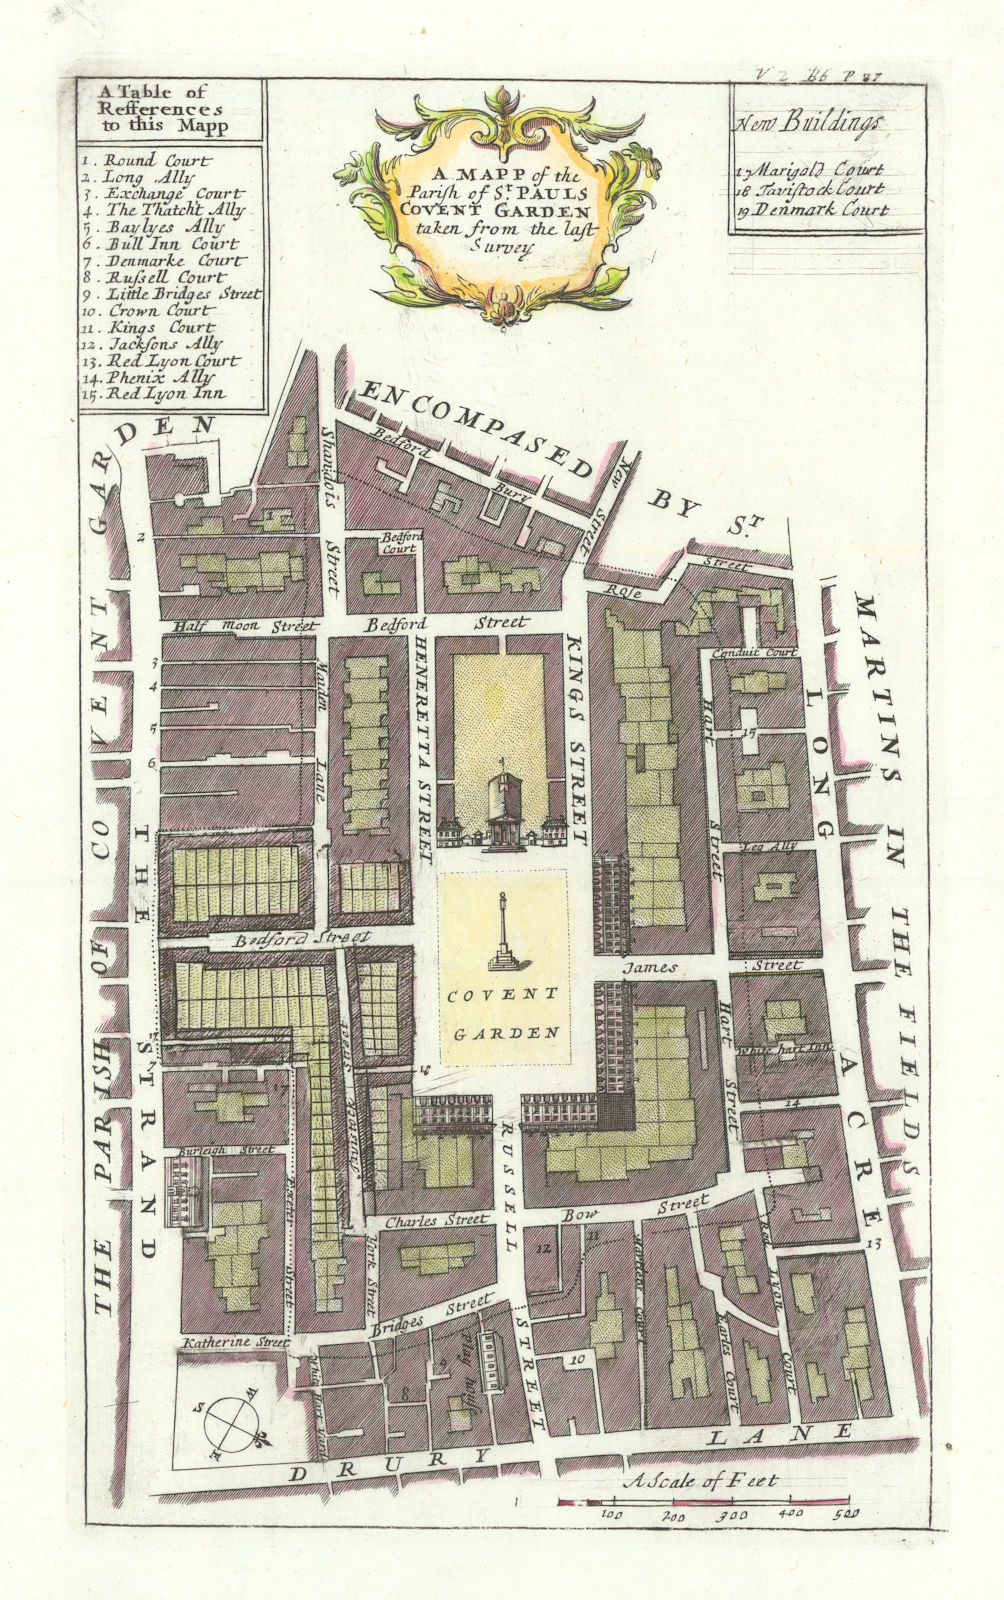 The parish of St Paul's, Covent Garden. Strand. Long Acre. STOW/STRYPE 1720 map